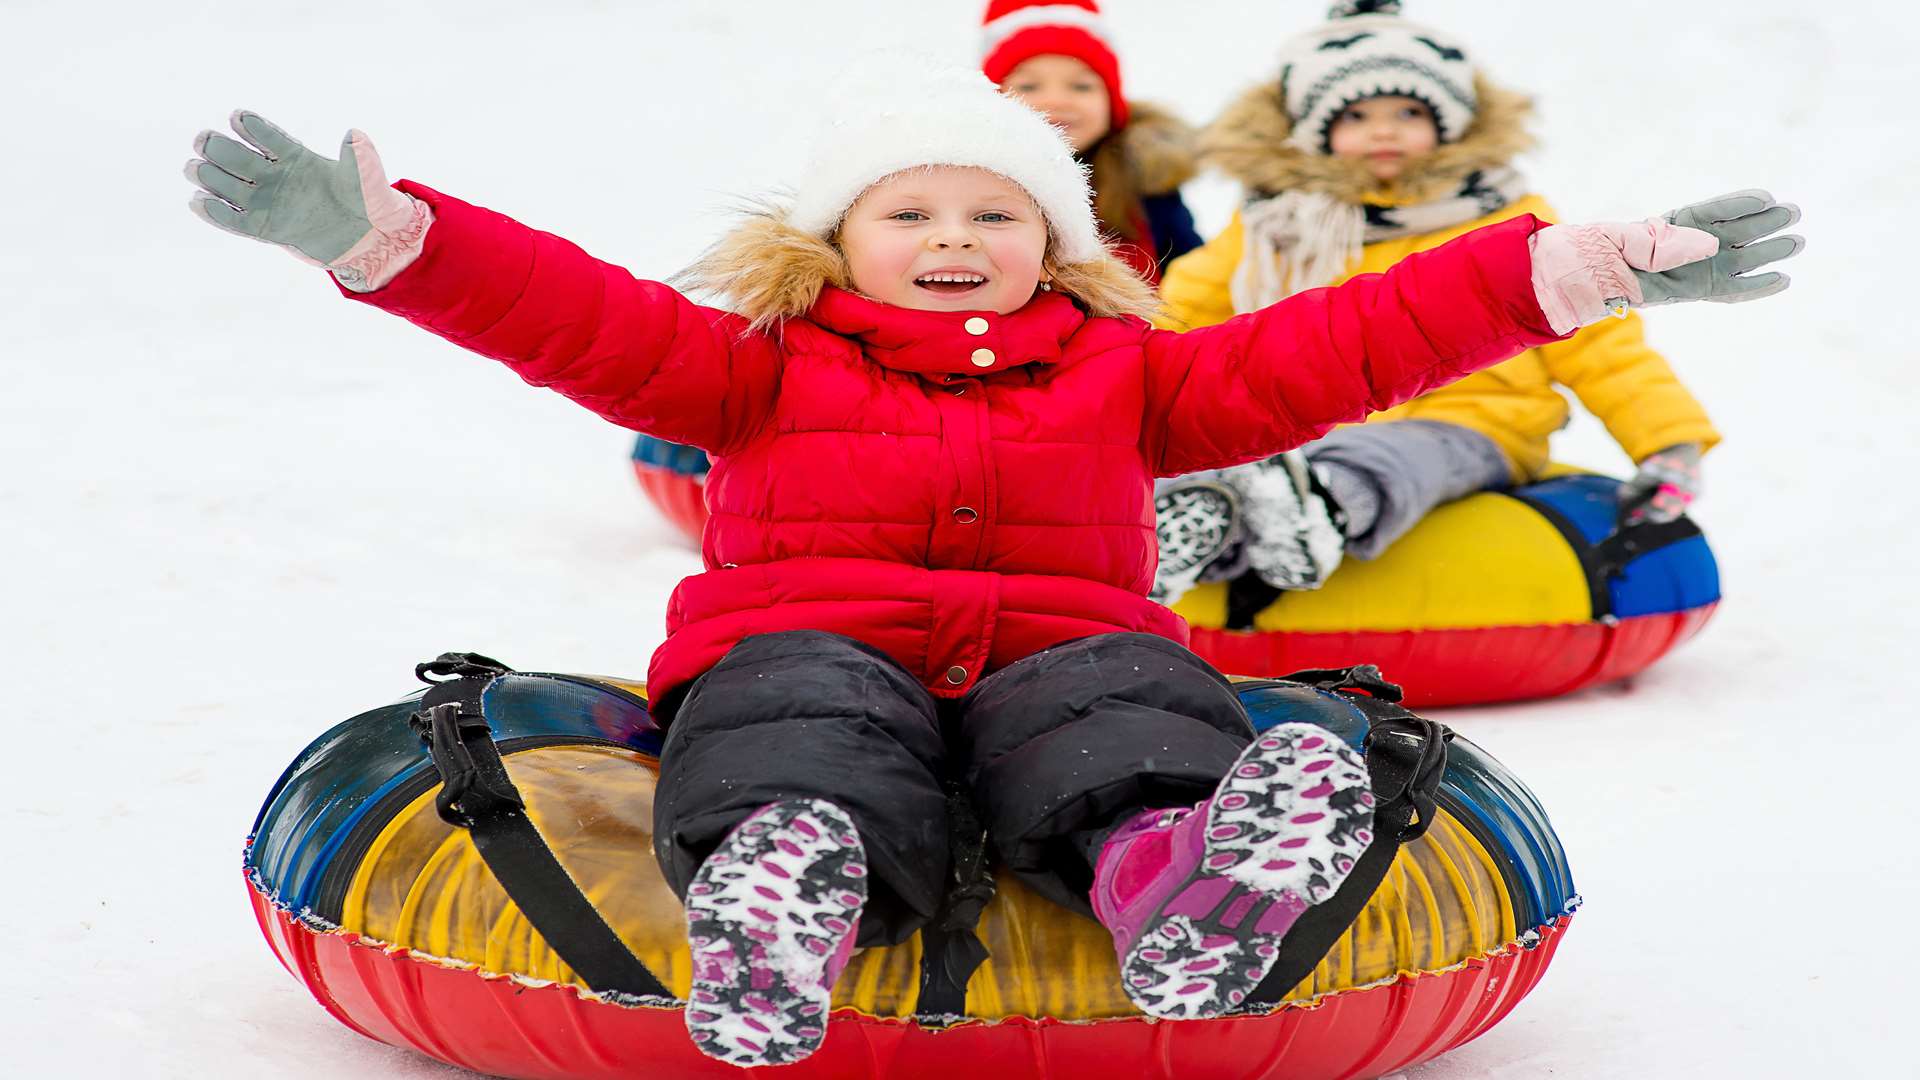 Snow tubing at Betteshanger Park has been called off after a break-in. Picture: Shutterstock